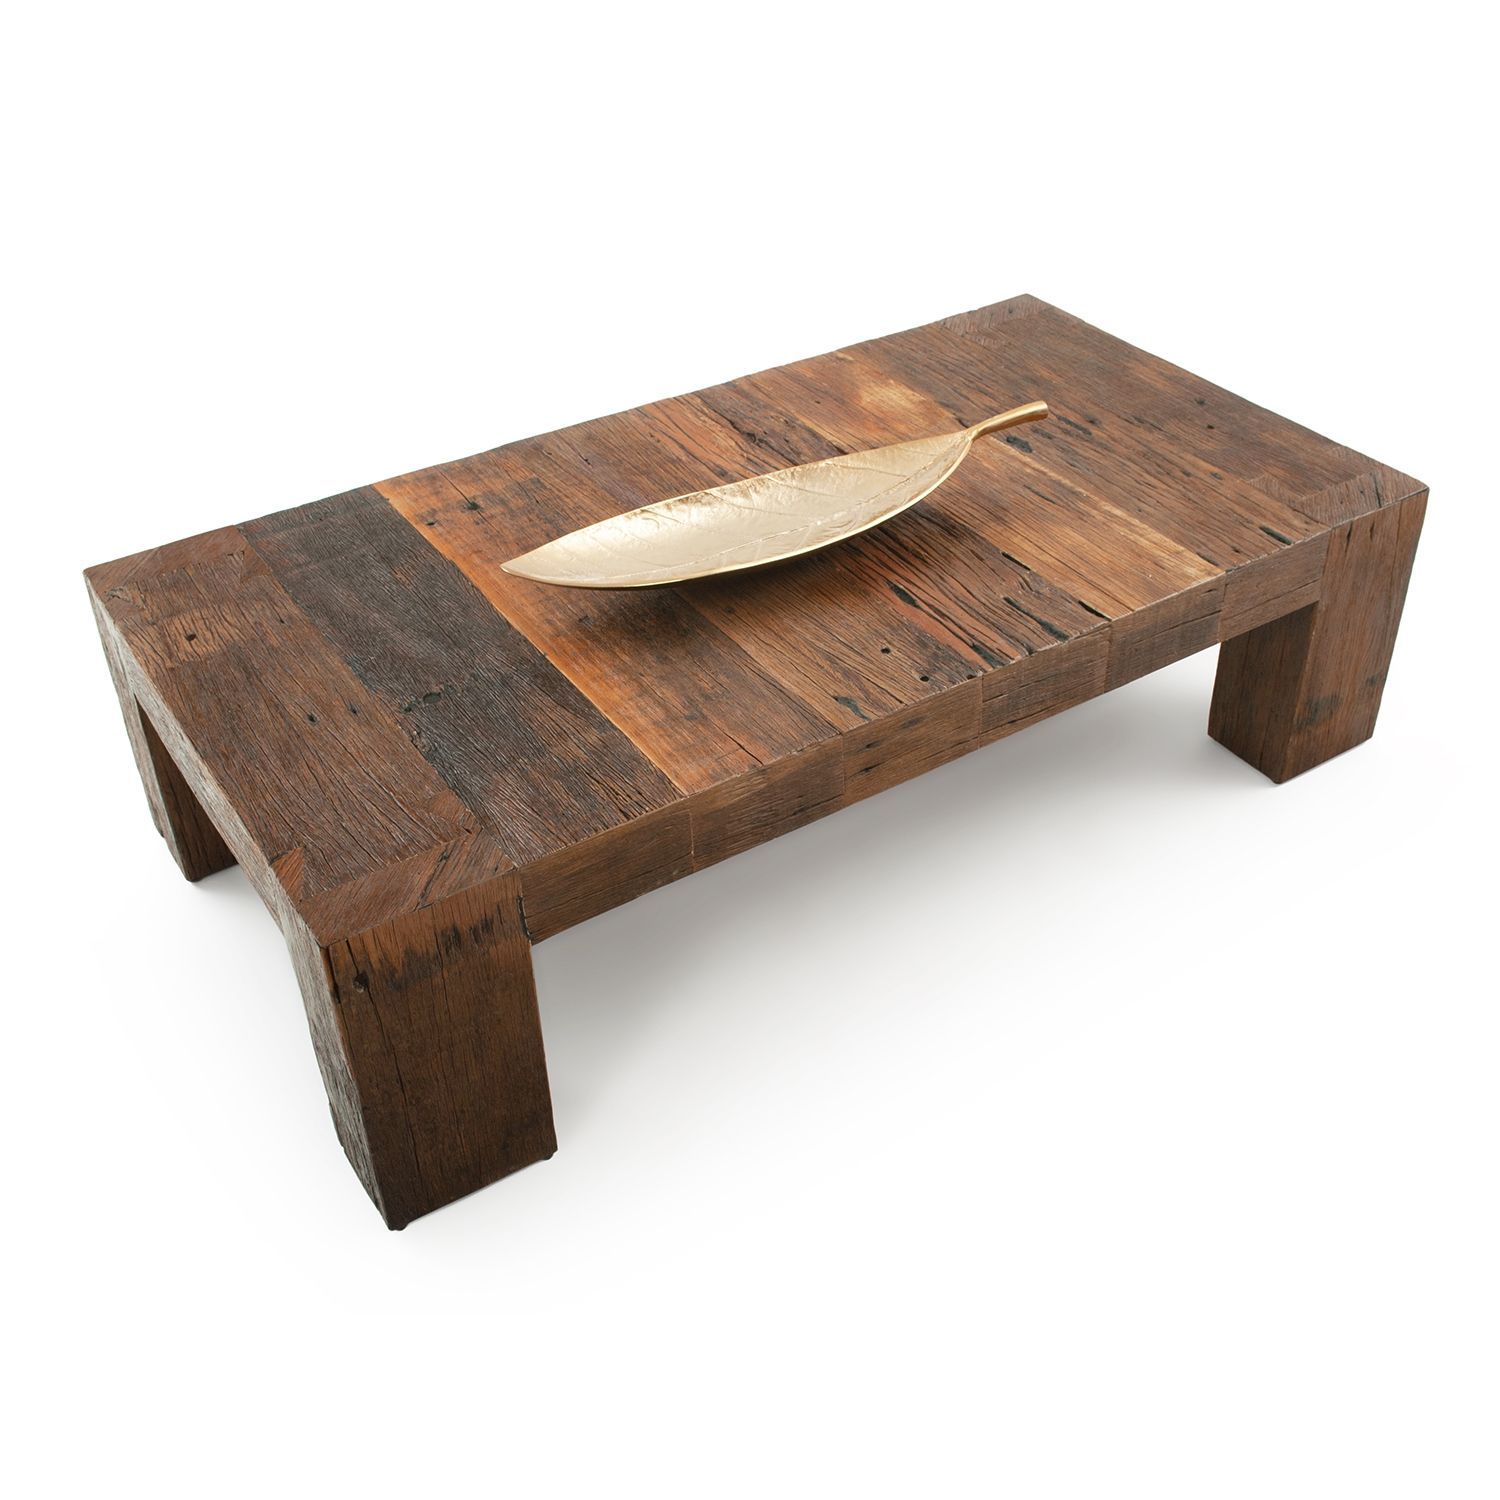 Rustic Reclaimed Wood Coffee Table Throughout Rustic Coffee Tables (View 14 of 15)